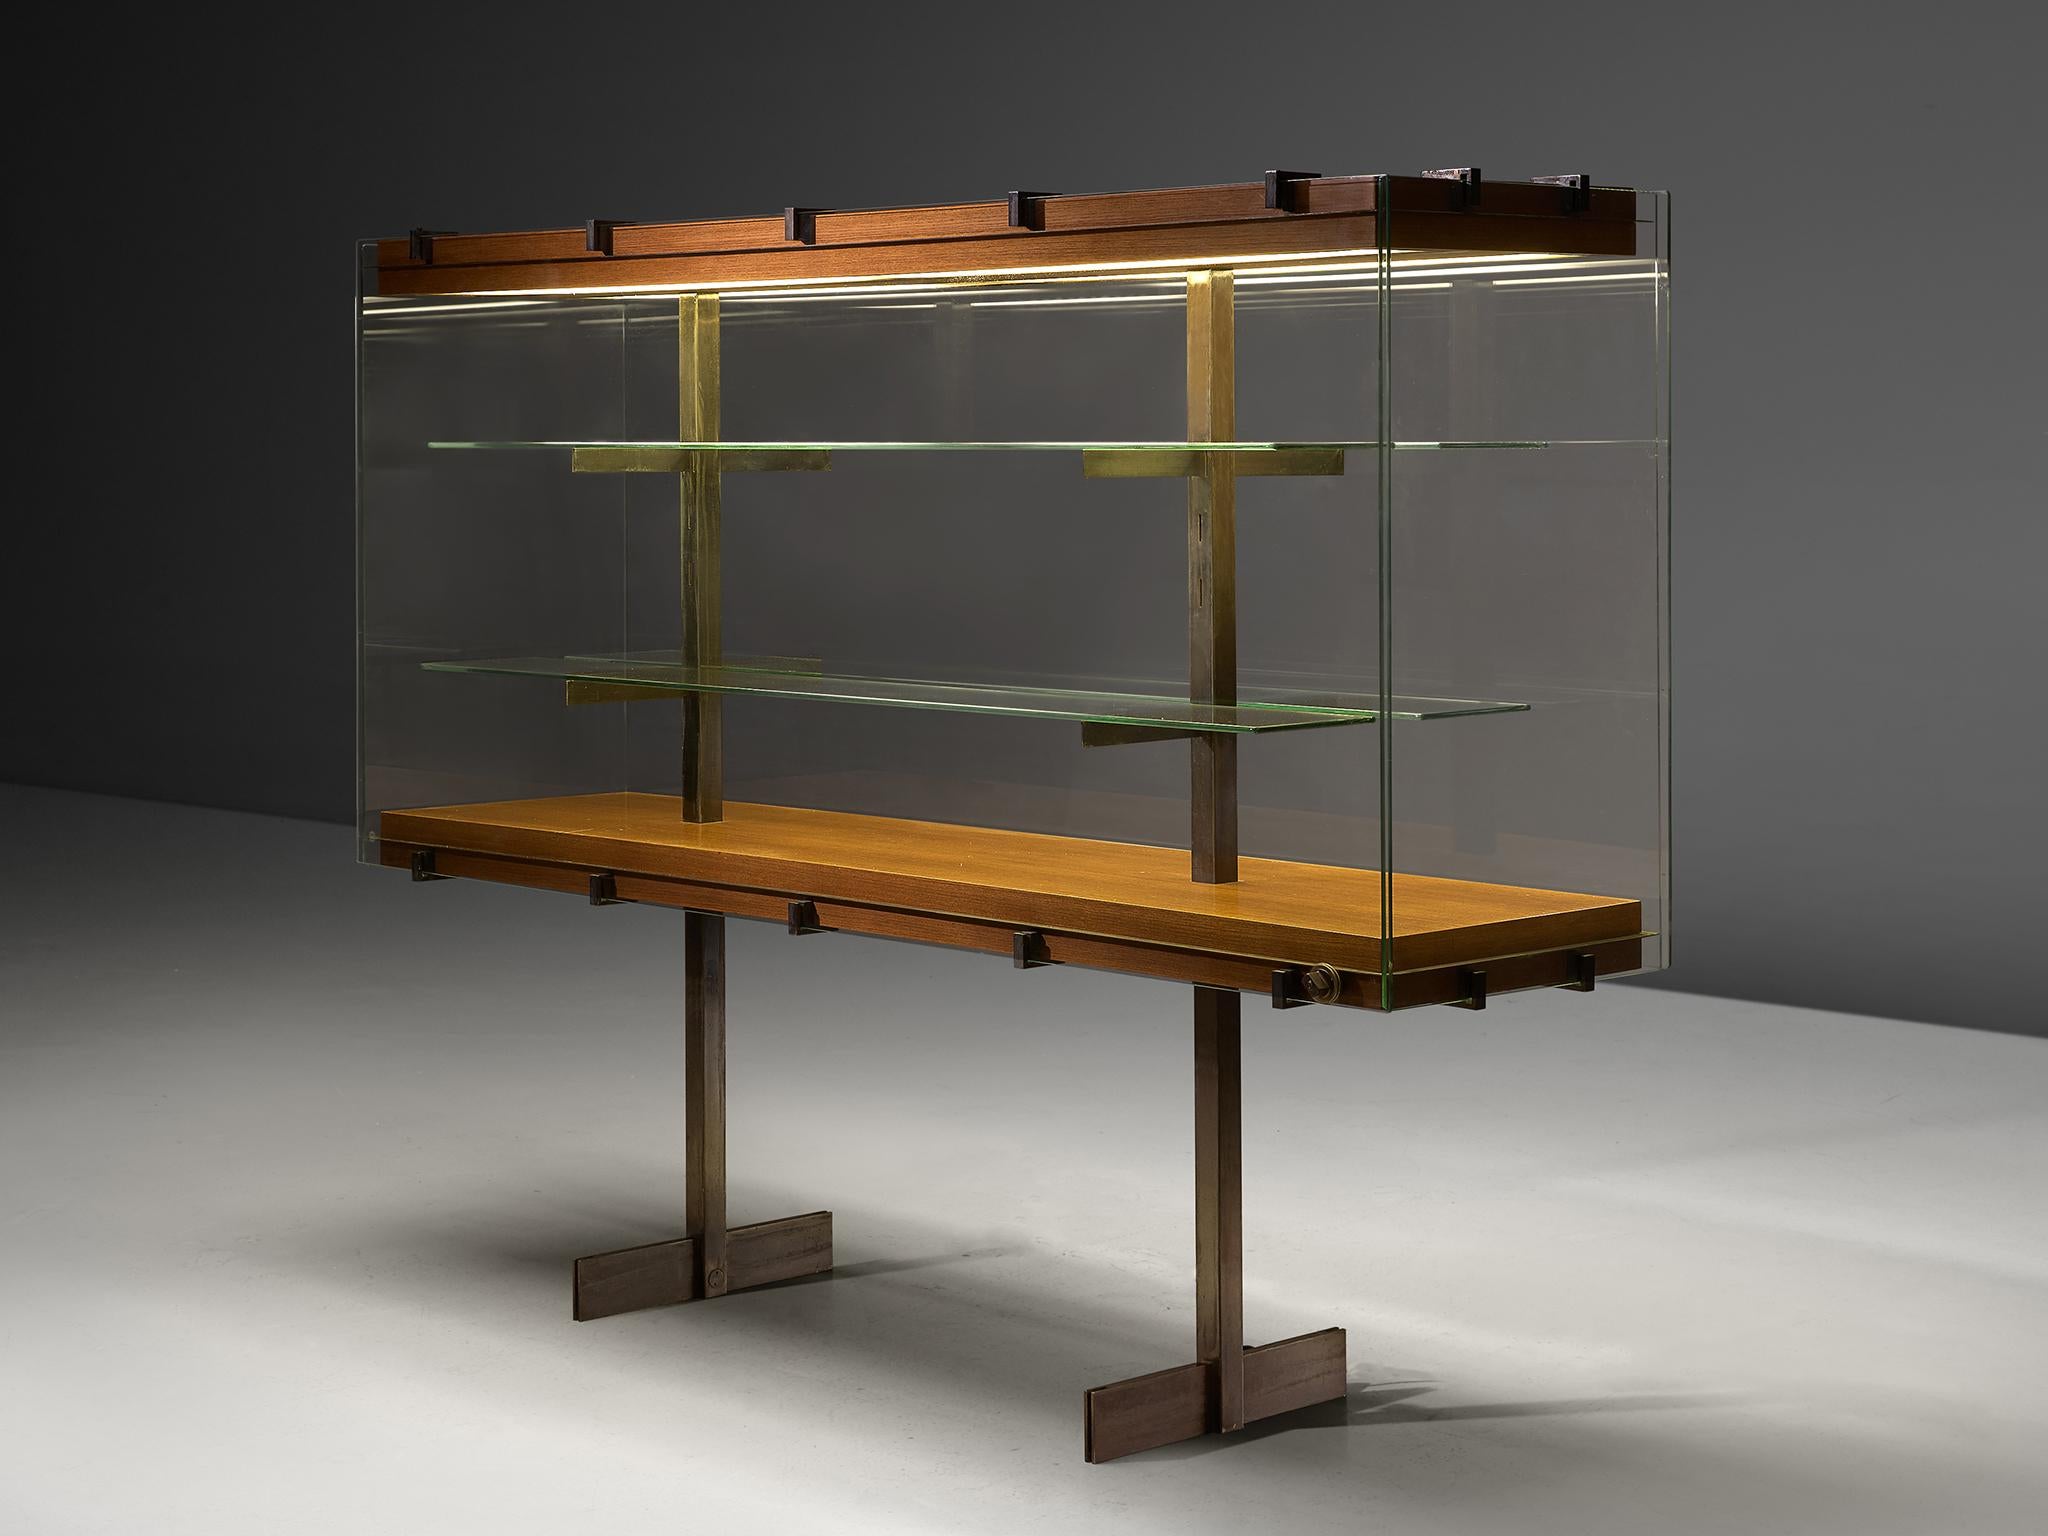 De Coene, vitrine, wood, steel and glass, Belgium, 1960s. 

Large modernist showcase with two doors on the side all original glass and in good condition. Accompanied with steel and wood frames. The vitrine features the Brutalist and muscular